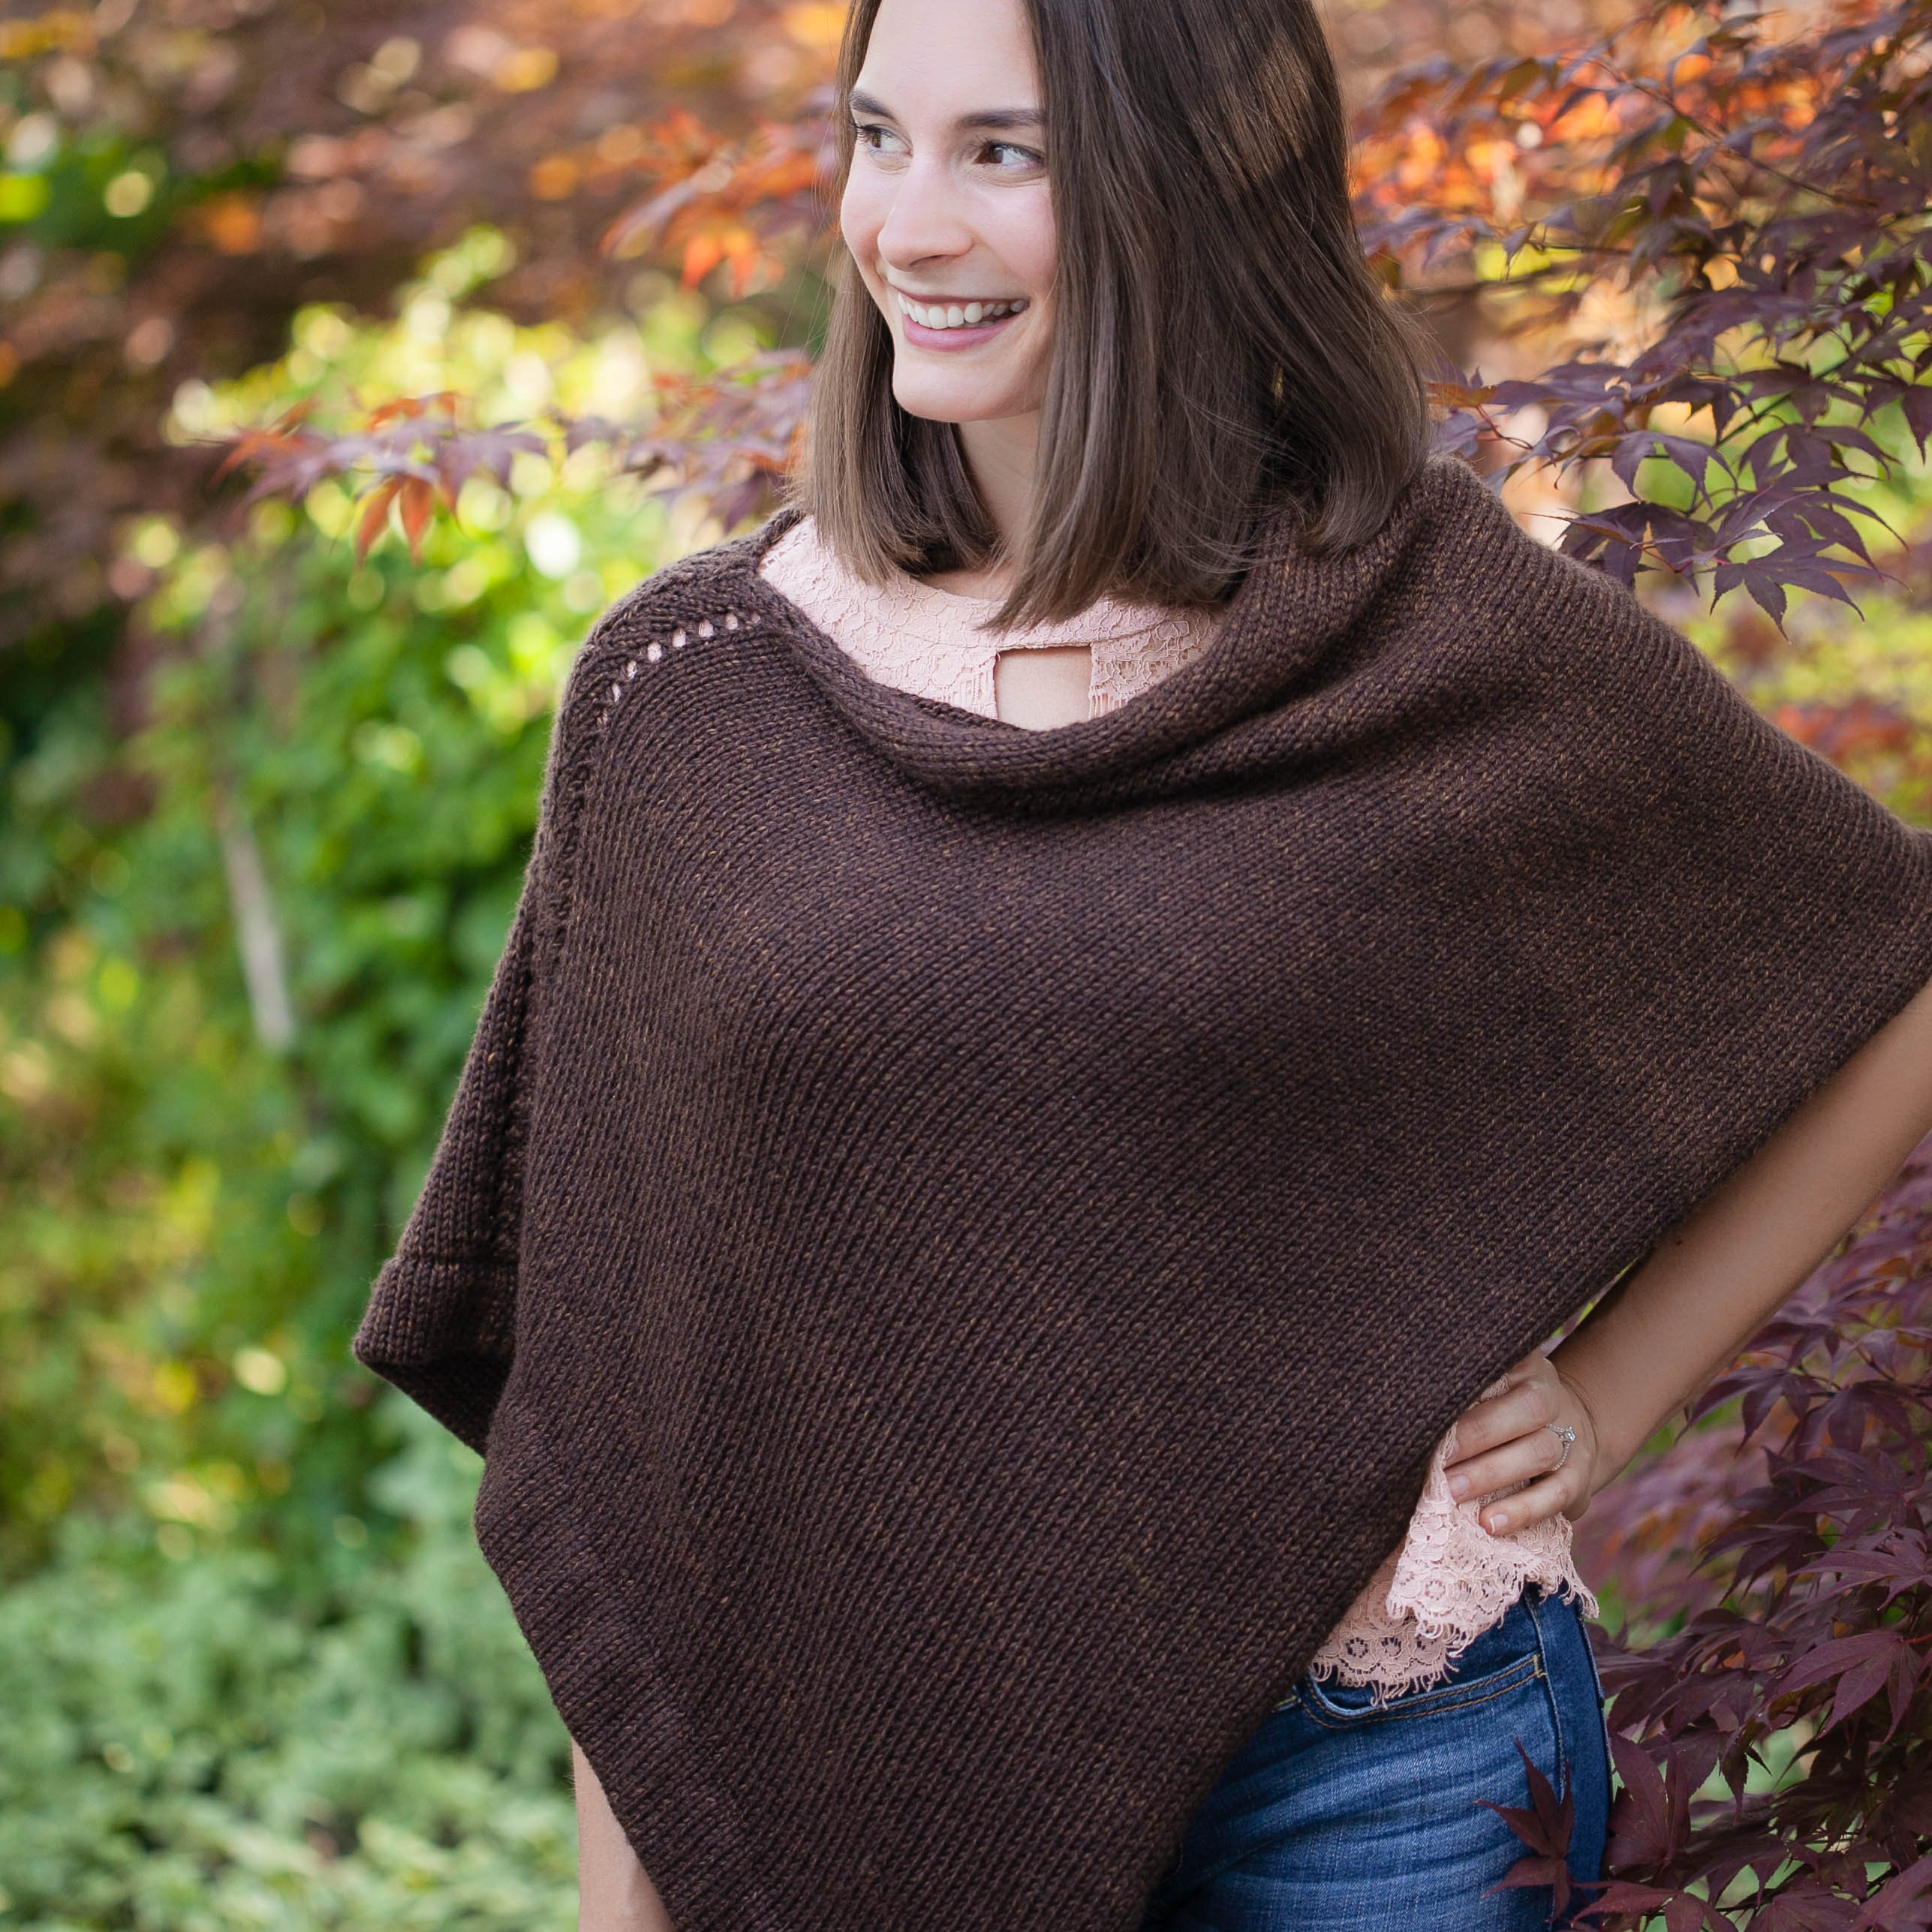 Free Knitting Patterns For Ponchos Or Capes Loom Knit Poncho Pattern The Rebecca Poncho Has An Elegant Design And Is Loom Knit From One Rectangle Easy Fold Cape Design Pdf Pattern